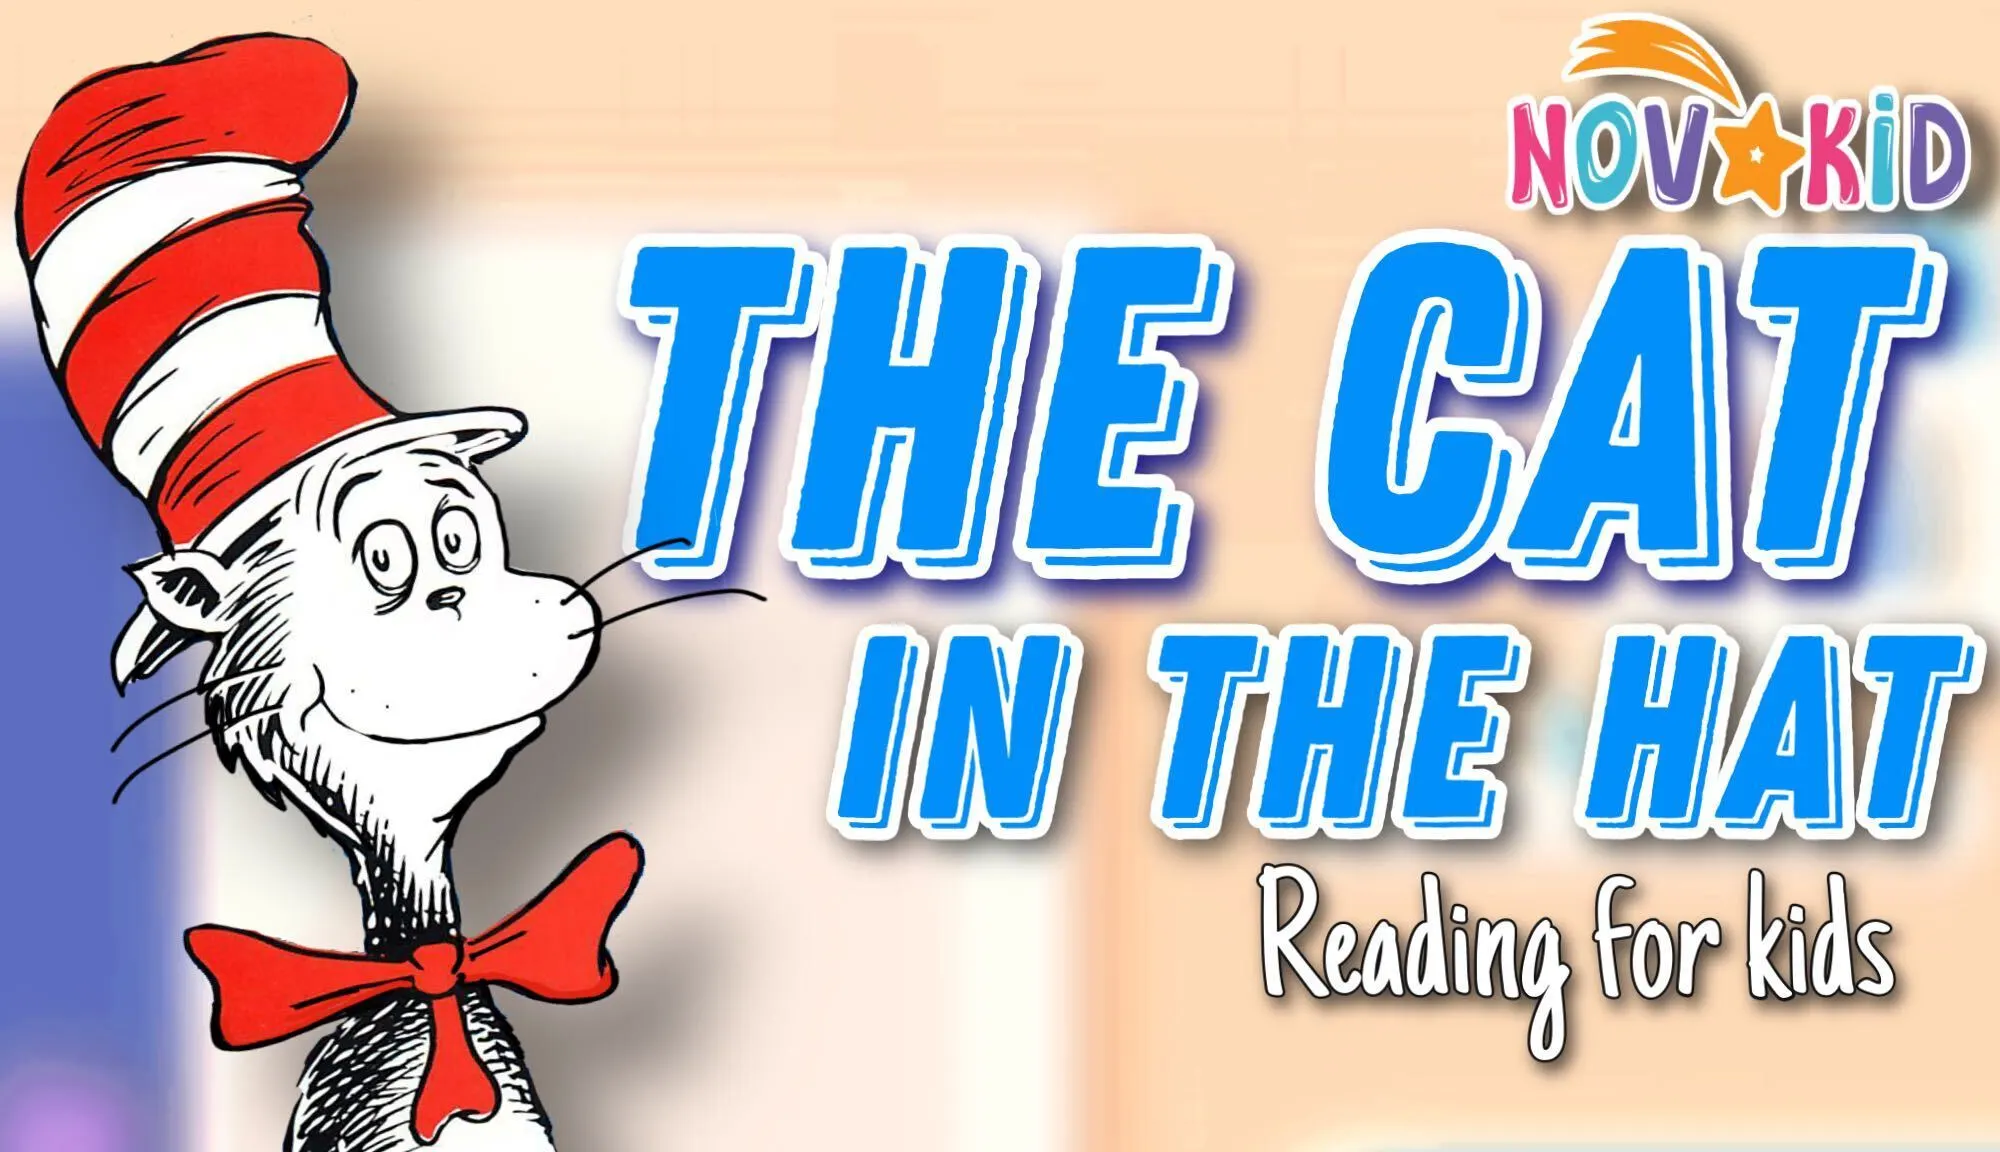 Lesen mit Novakid: The Cat in the Hat